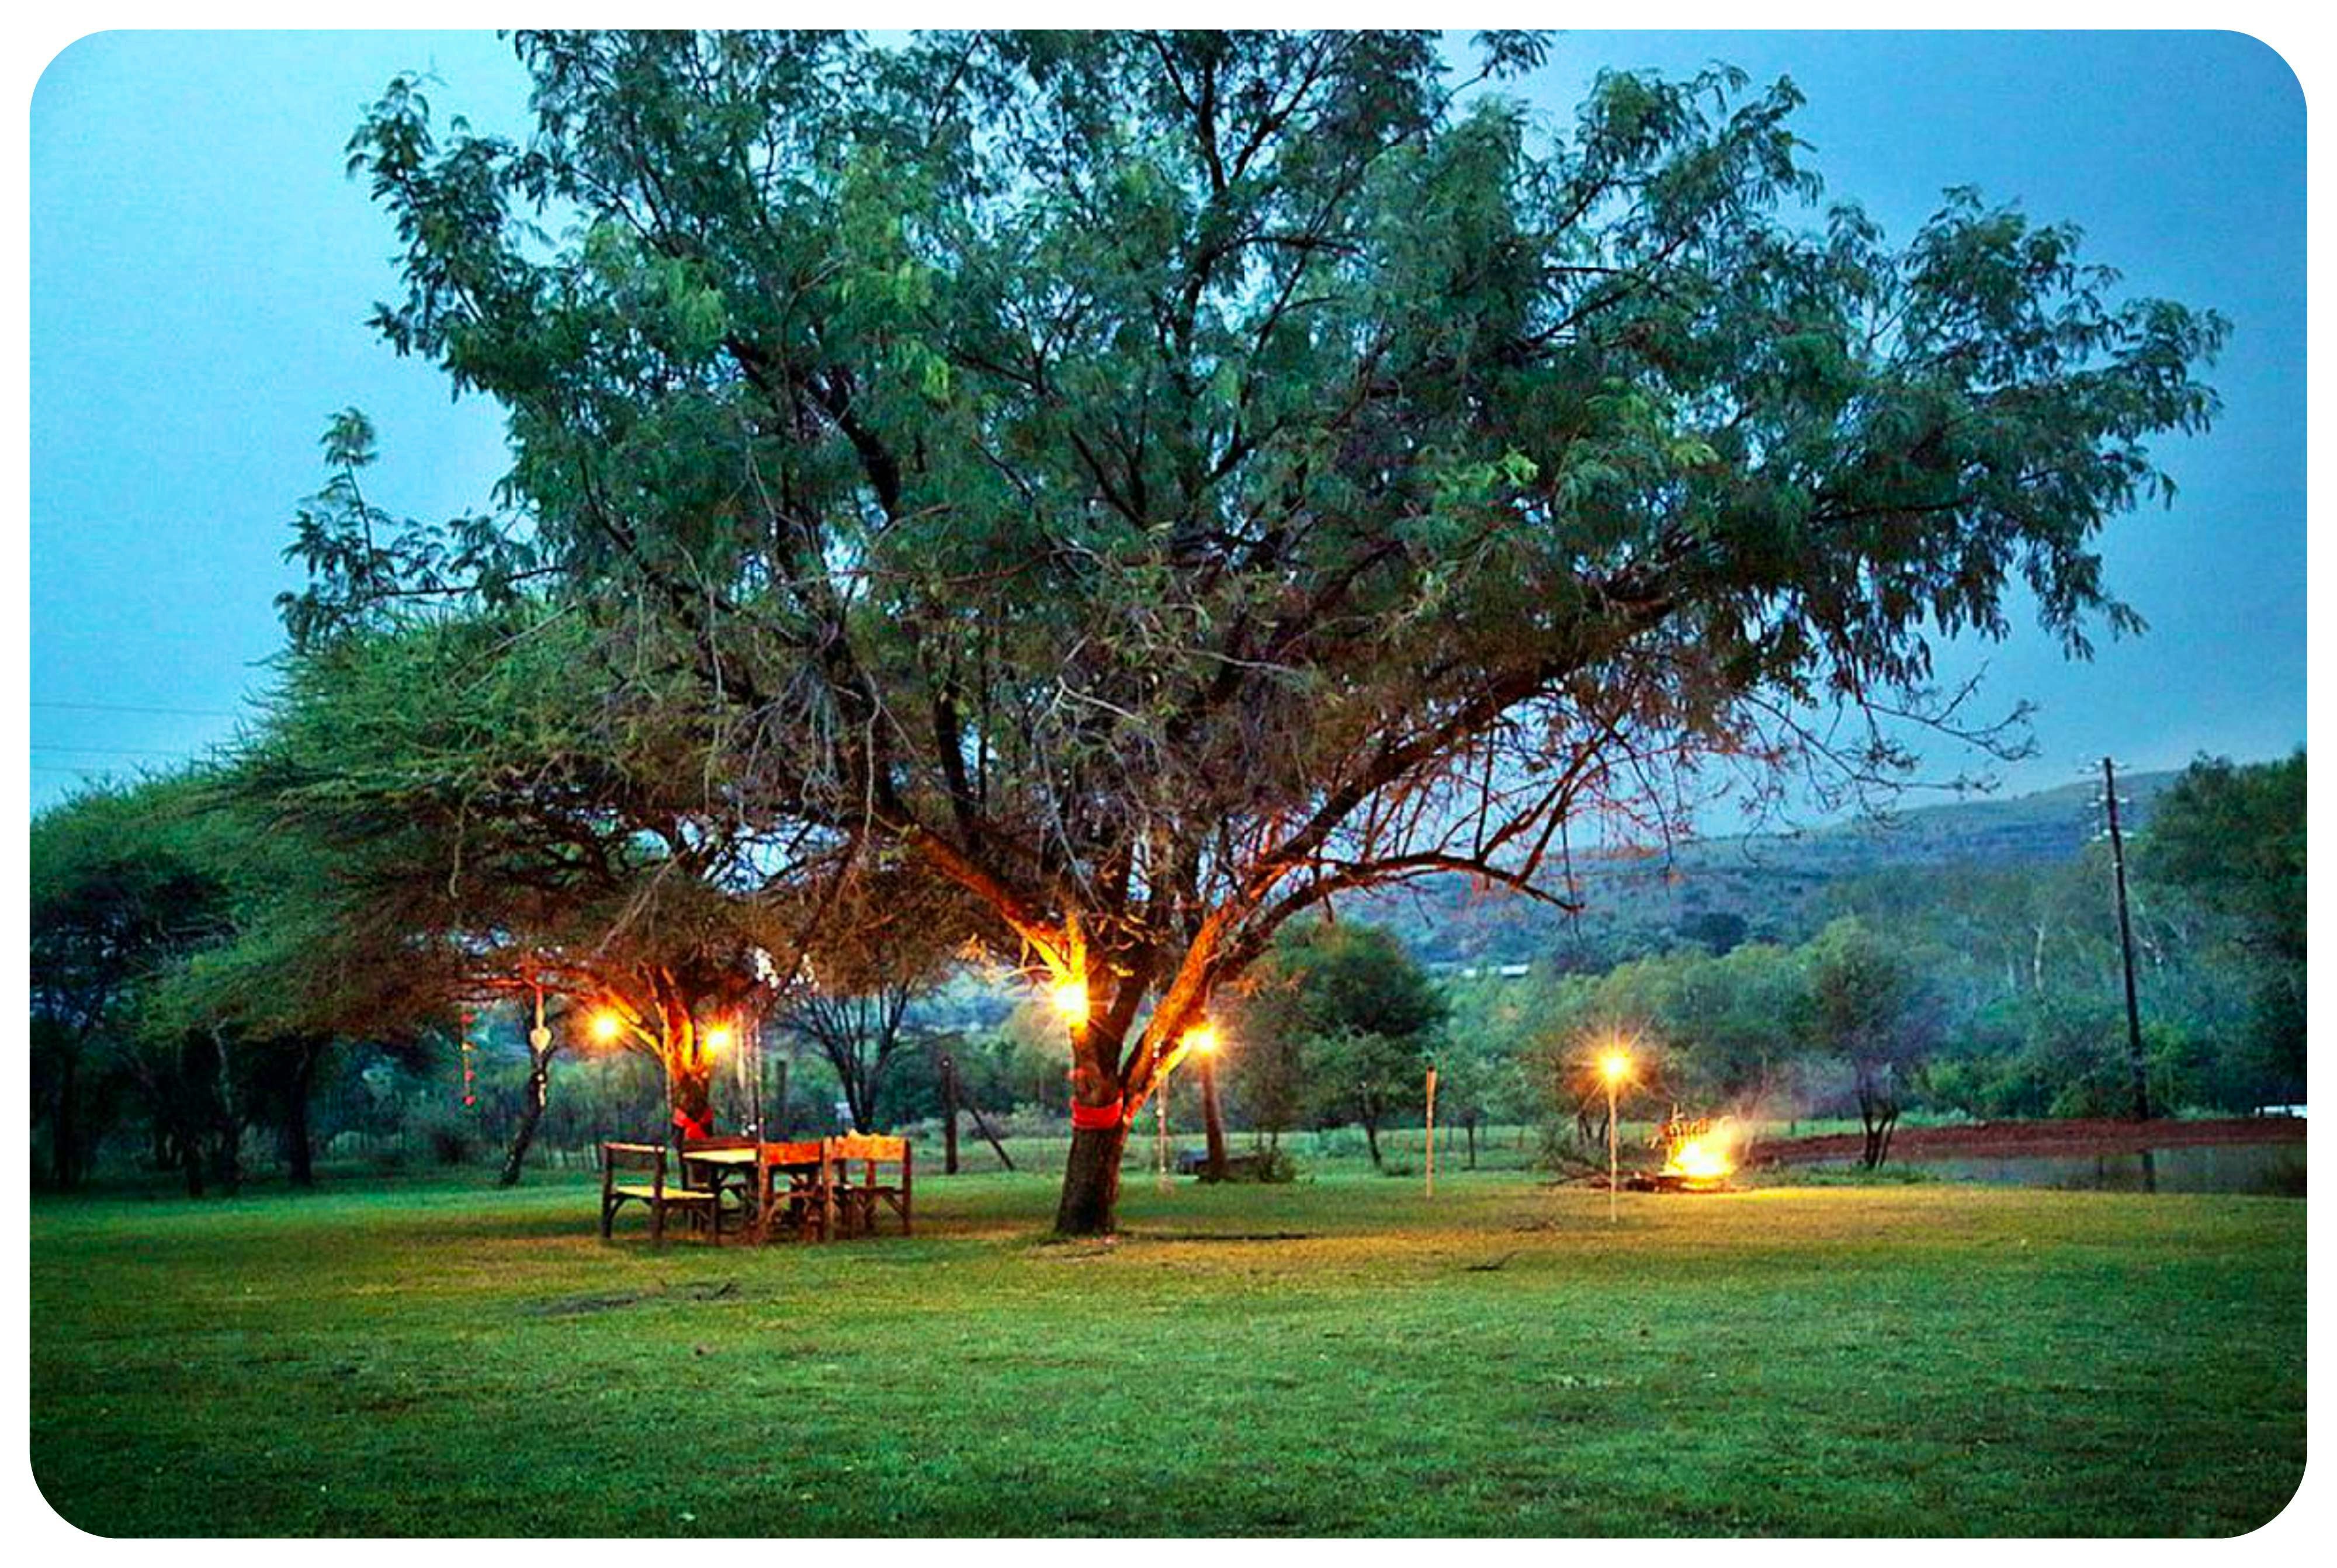 Thandile Country Lodge